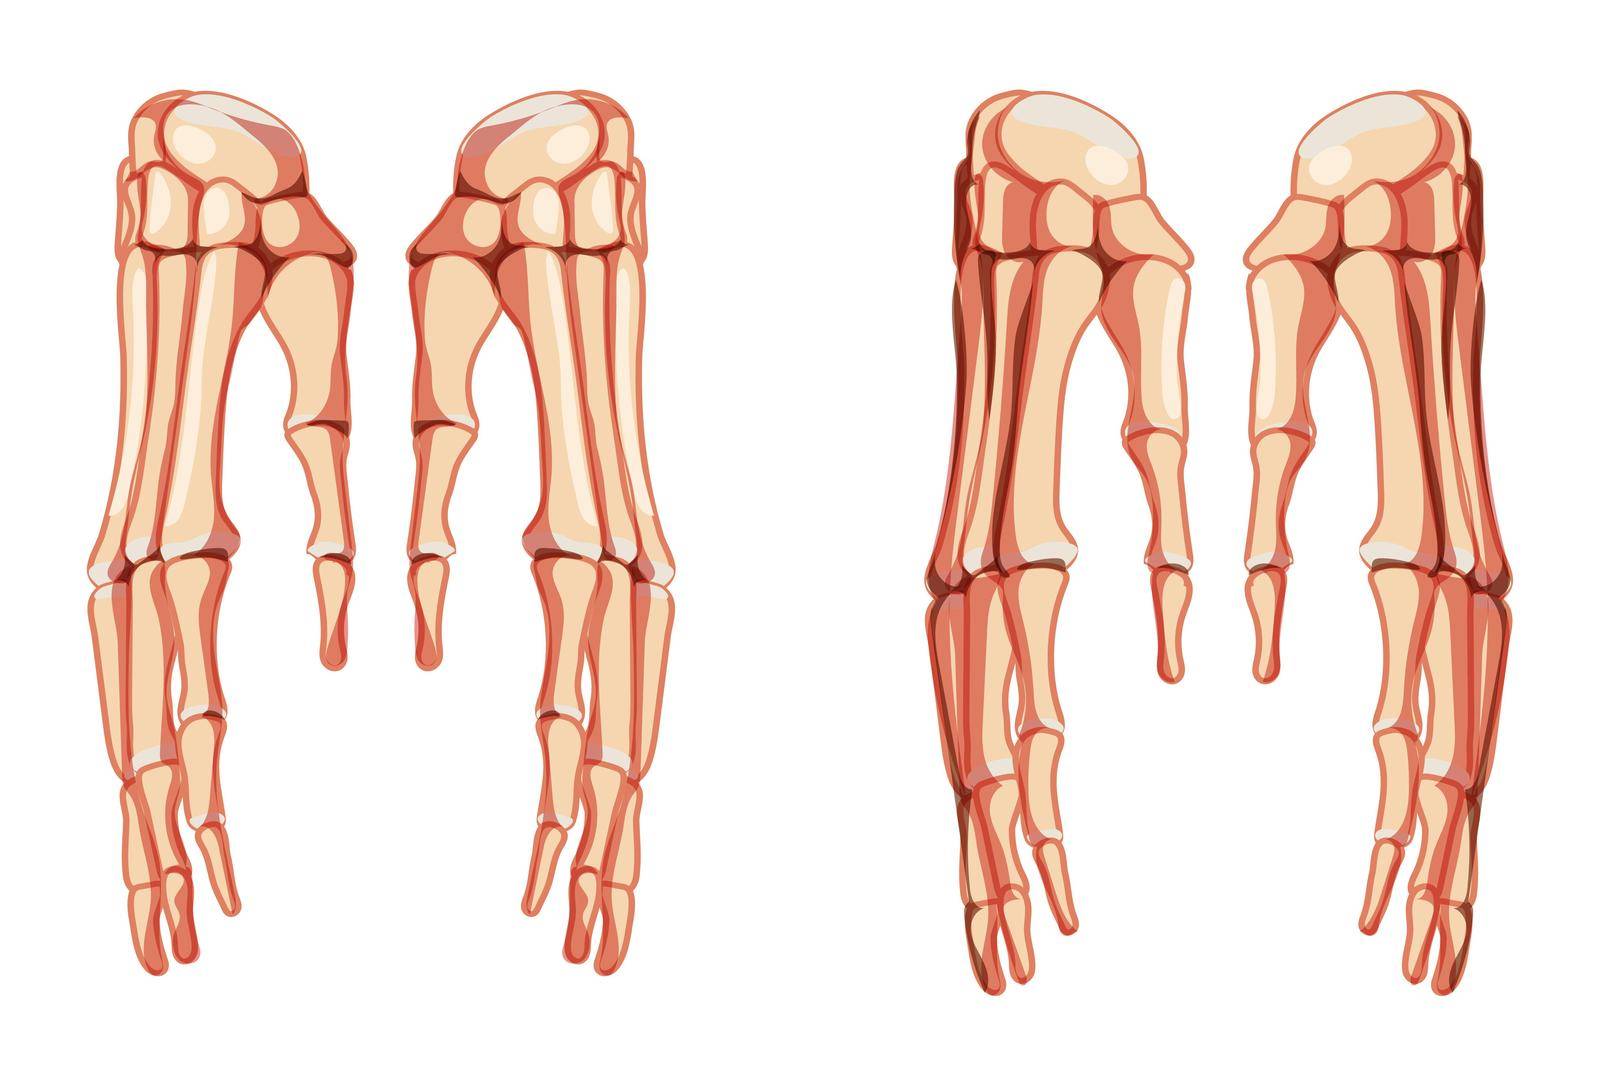 Hands Skeleton Human front Anterior ventral view. Set of carpals, wrist, metacarpals, phalanges. Anatomically correct 3D realistic flat natural color Vector illustration isolated on white background